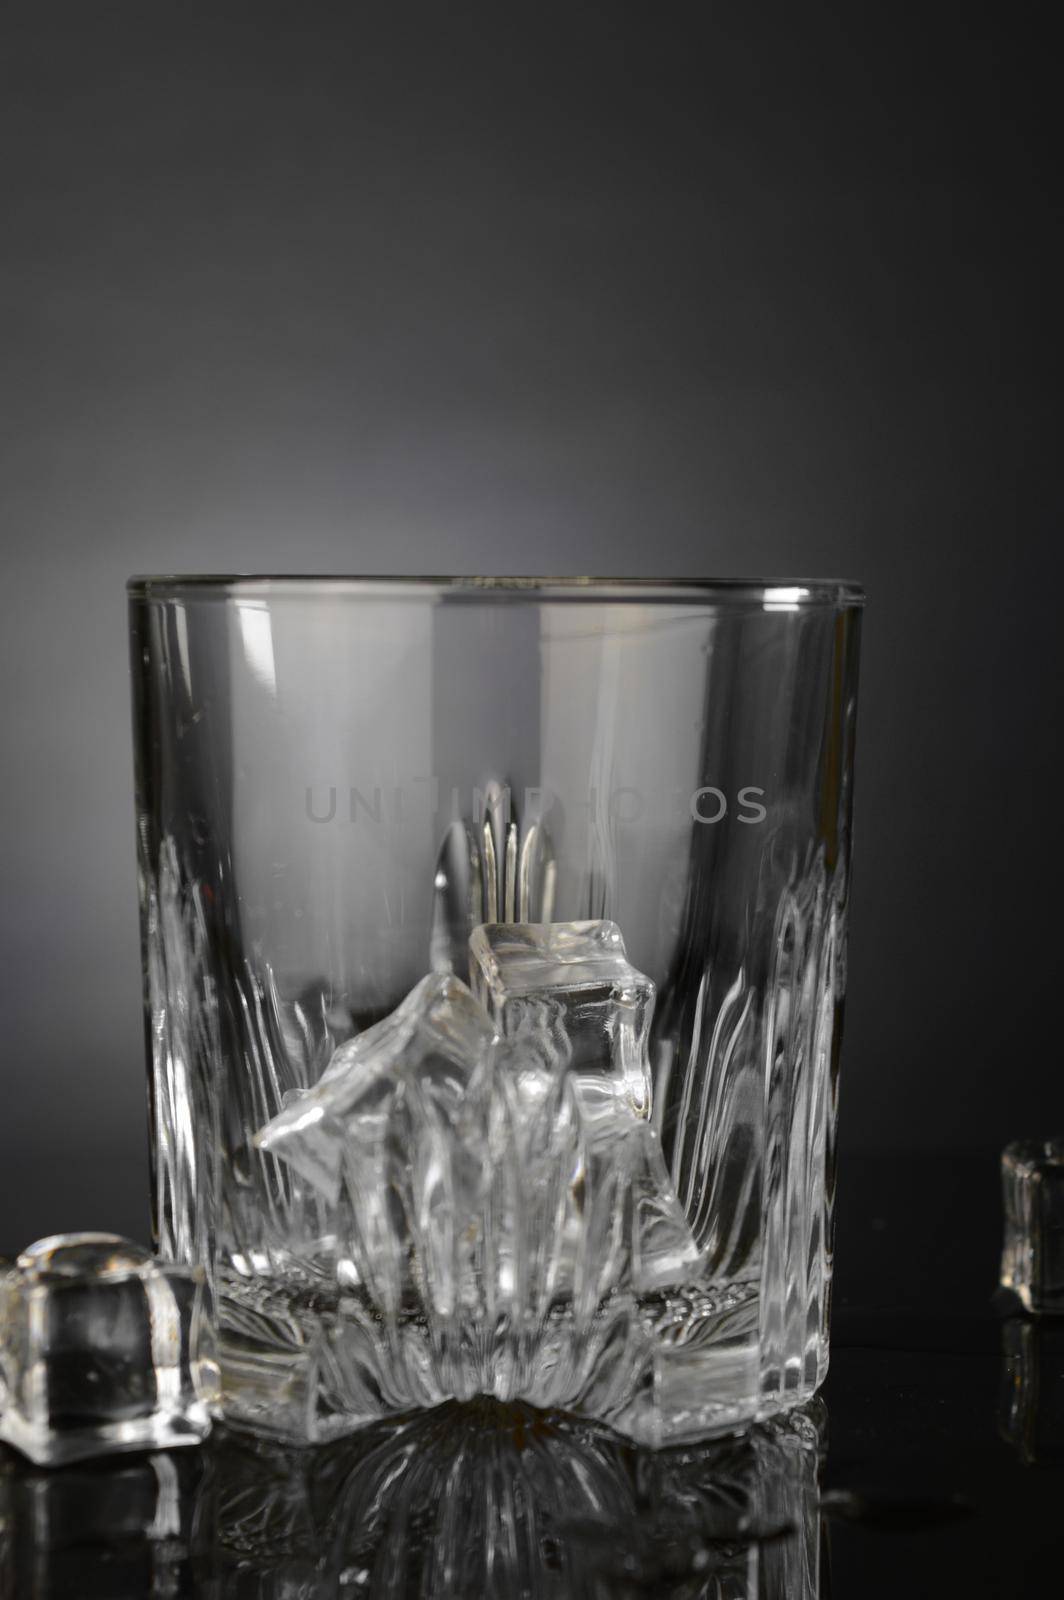 A crystal whiskey glass with some fresh ice is being prepared on the counter.